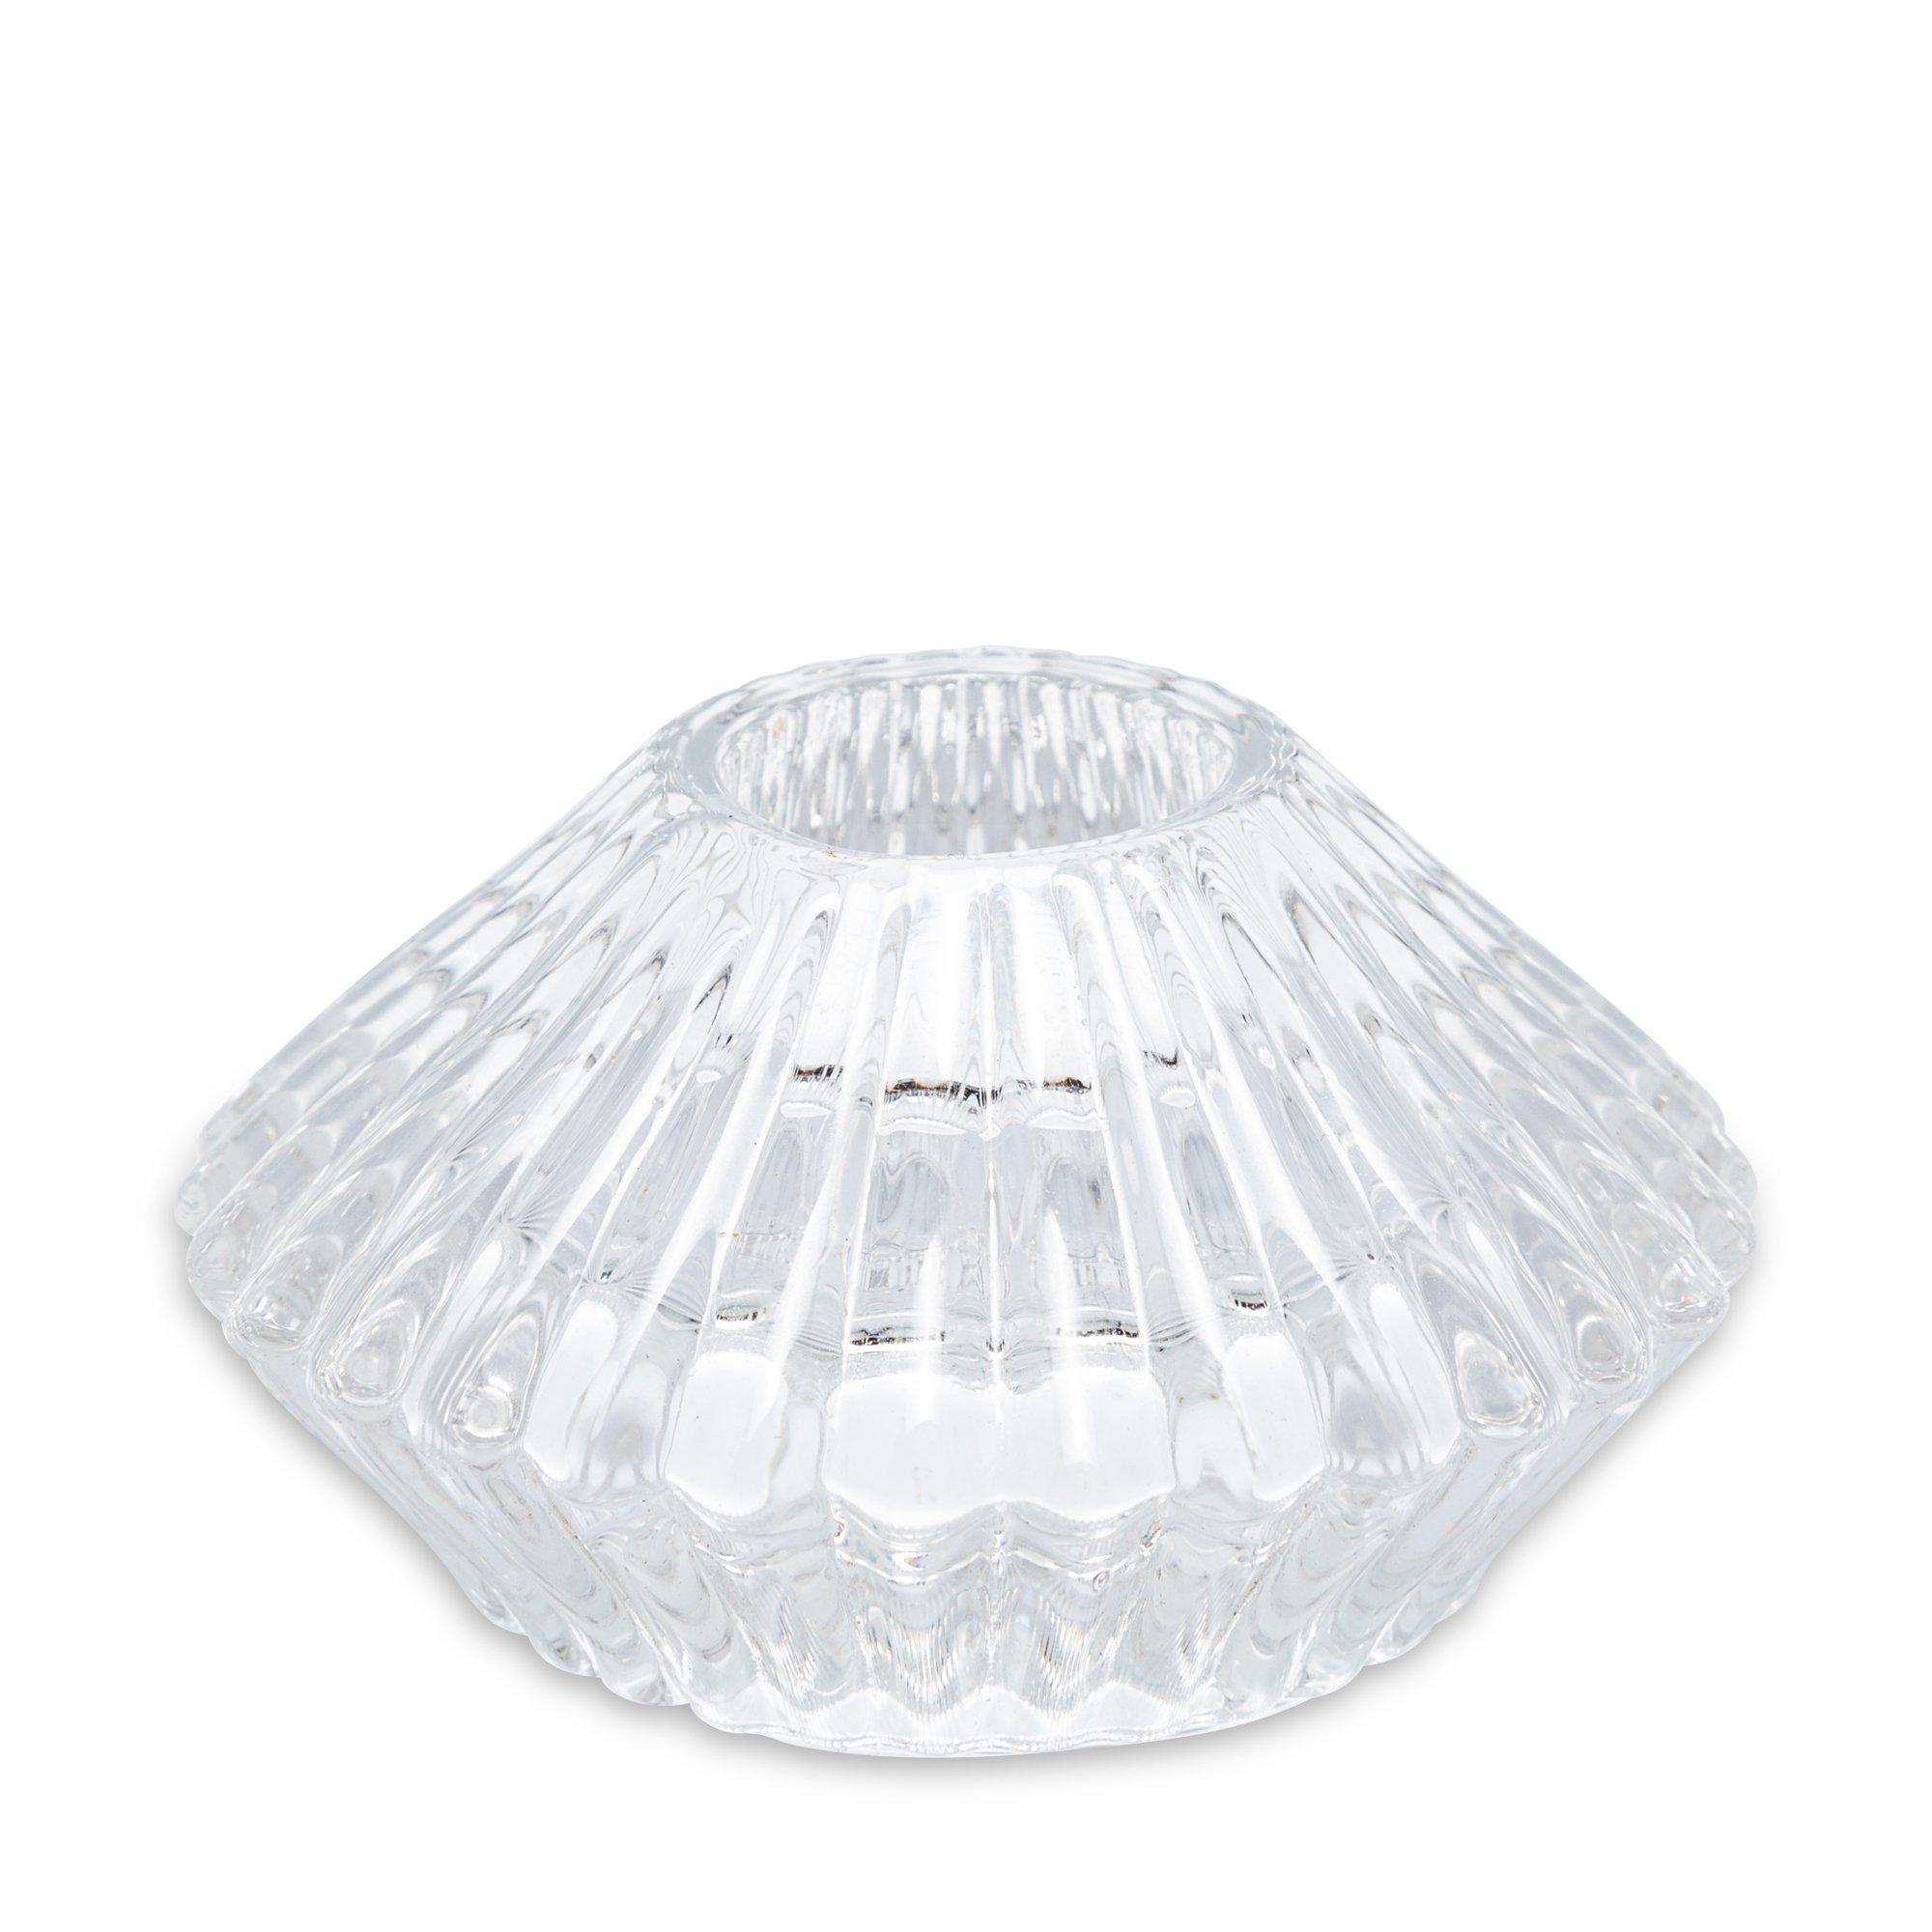 Manor Support pour bougie à chauffe-plat Teelicht crystal 